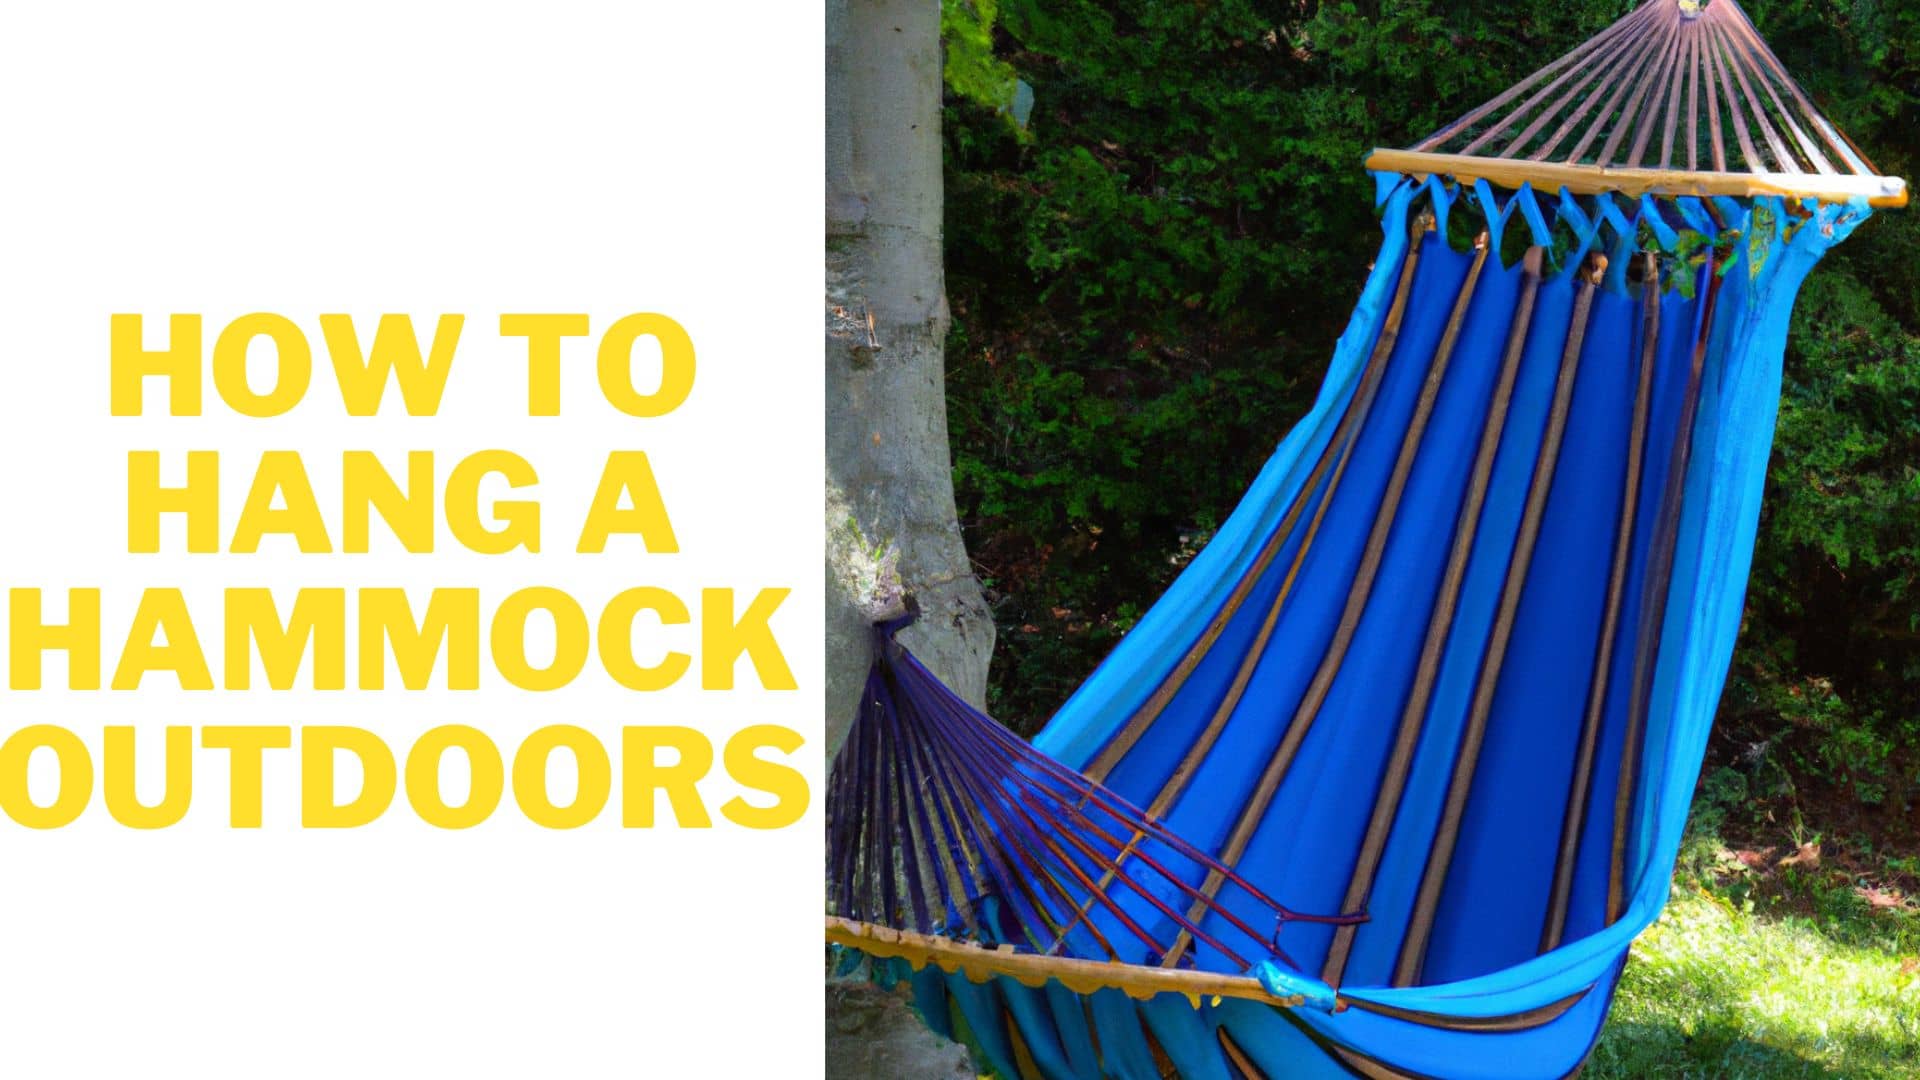 How to Hang a Hammock Outdoors